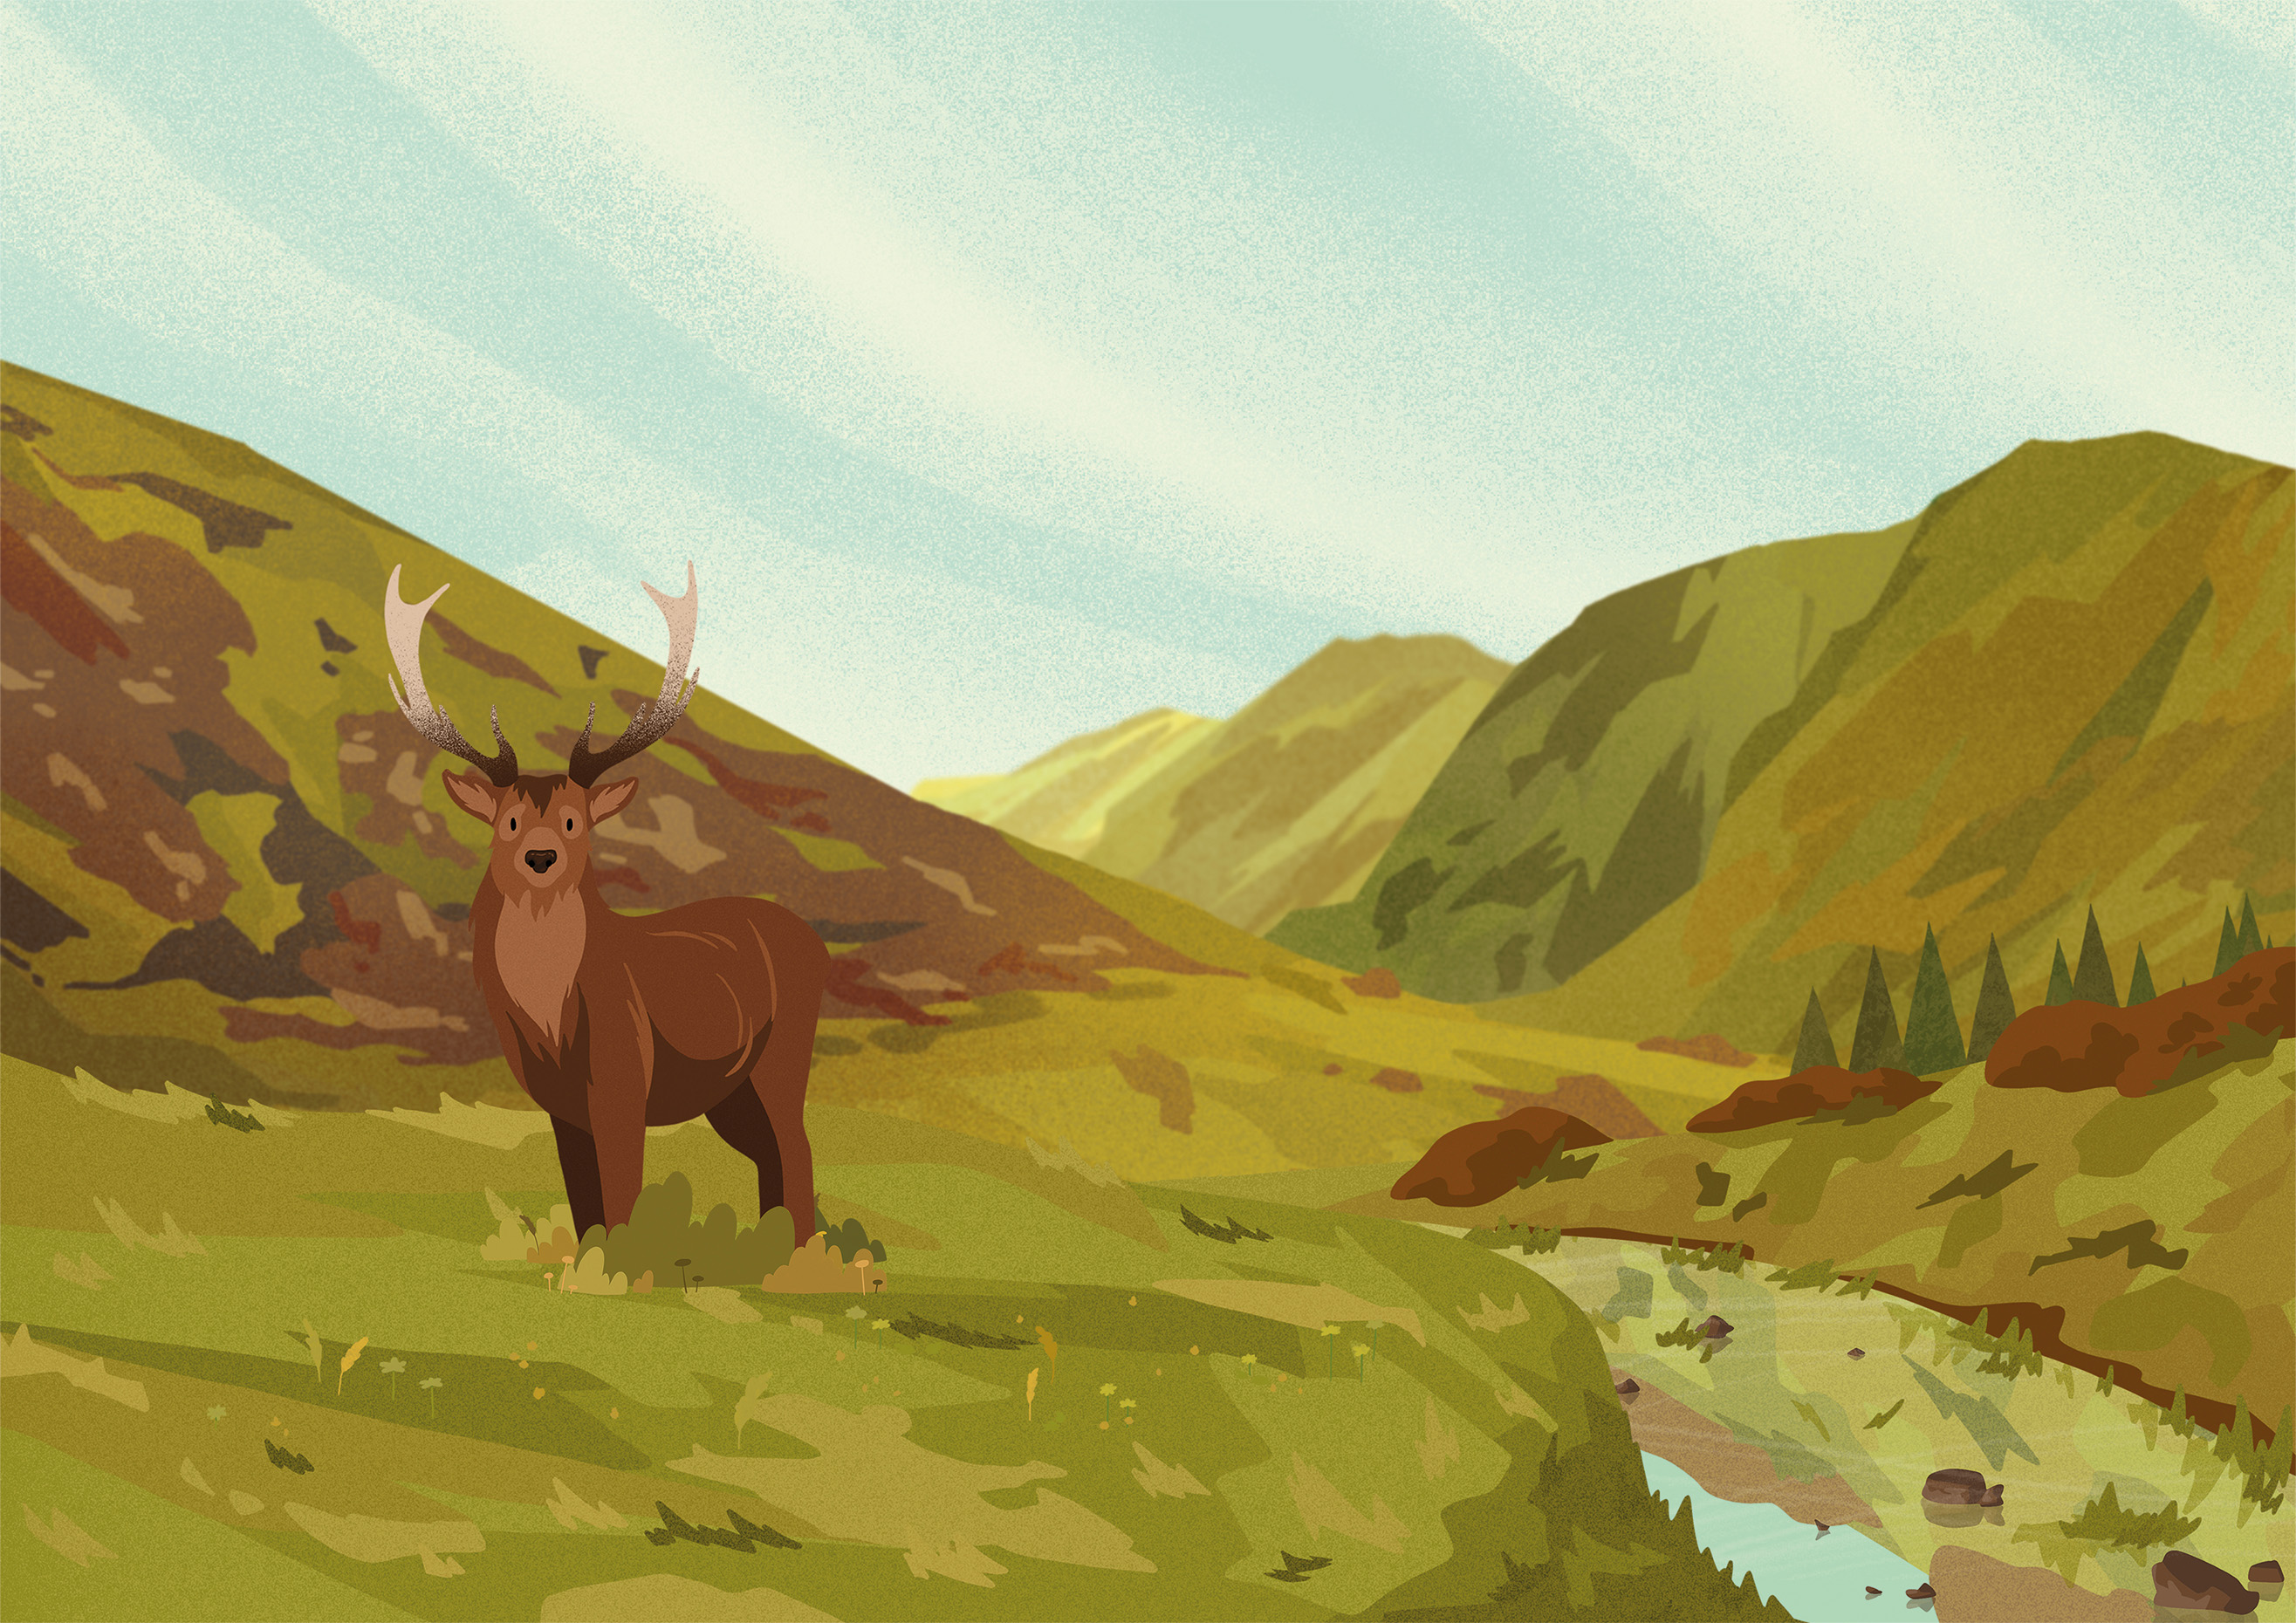 Landscape illustration depicting the Moffat Hills in Scotland with a Red Deer in the foreground.